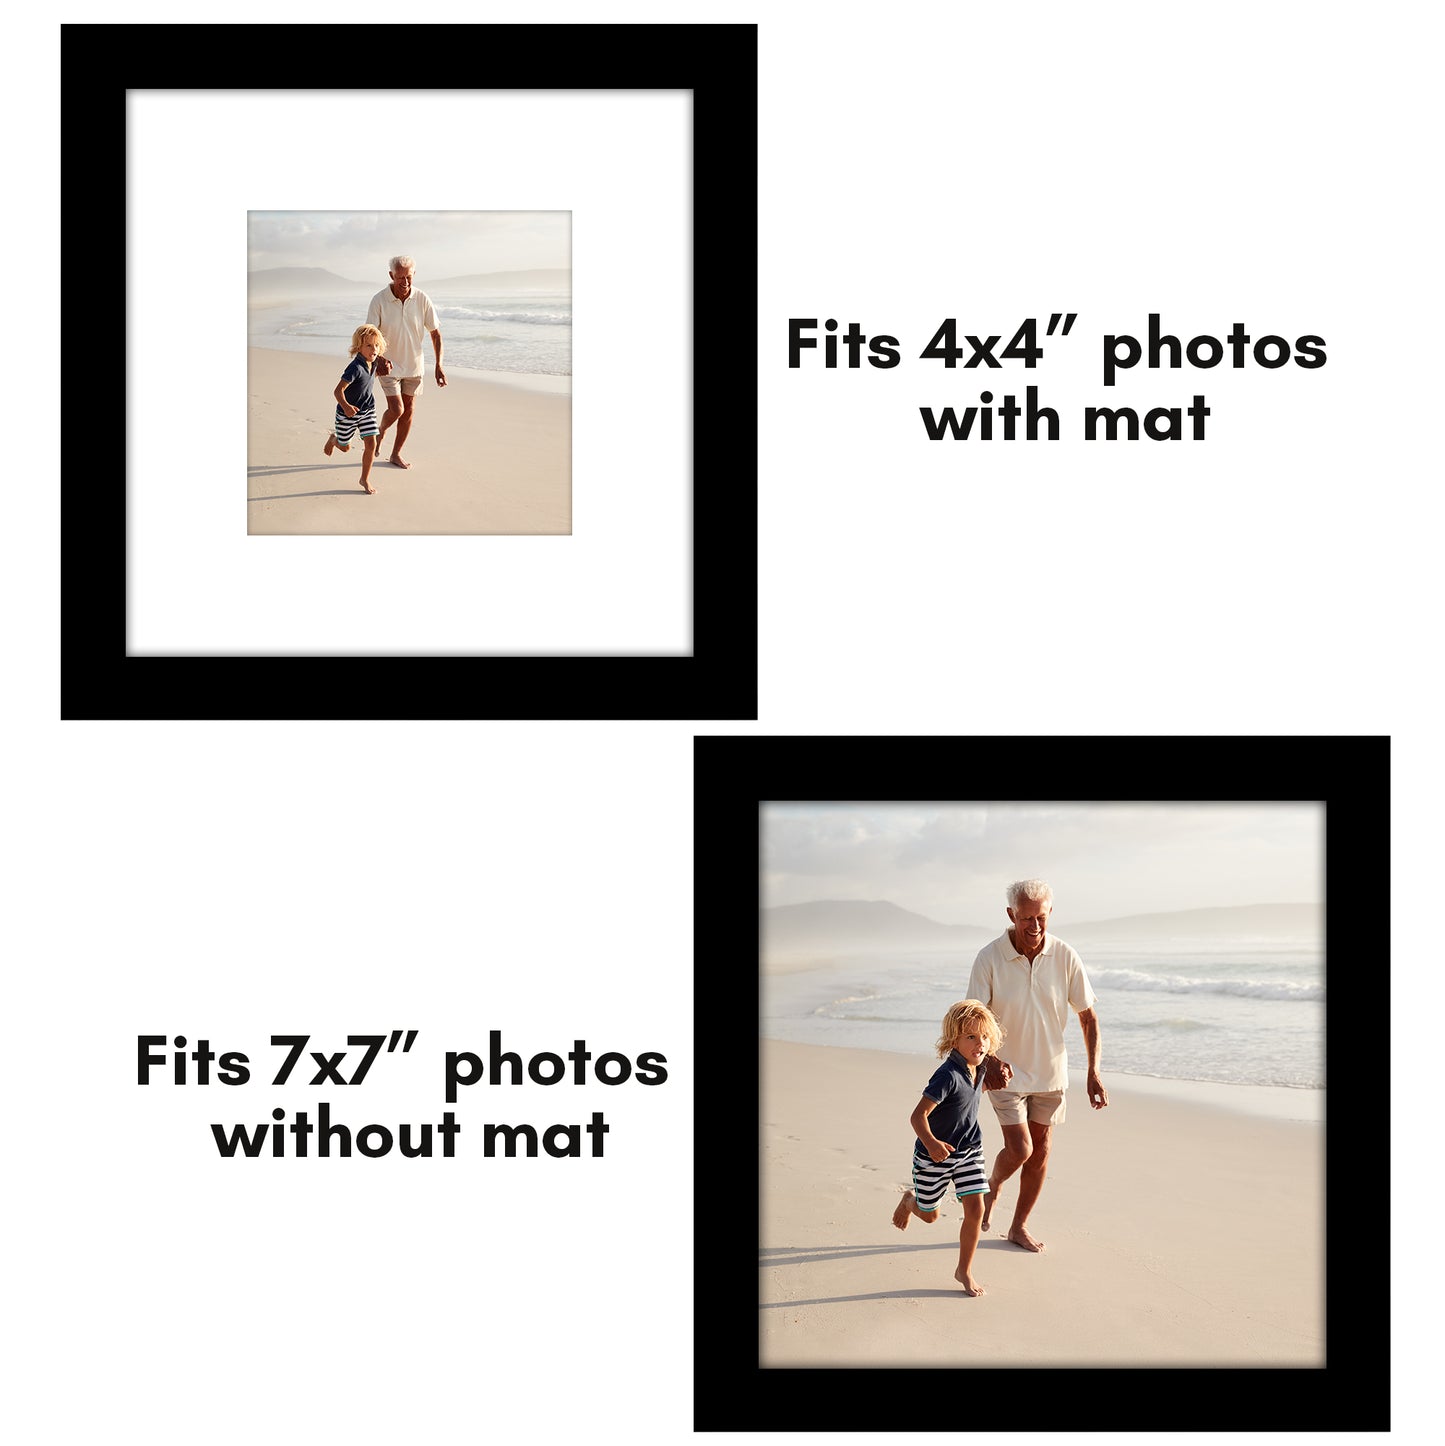 Picture Frame - Set of 2 - with Mat or Without Mat - Plexiglass Cover and Hanging Hardware included